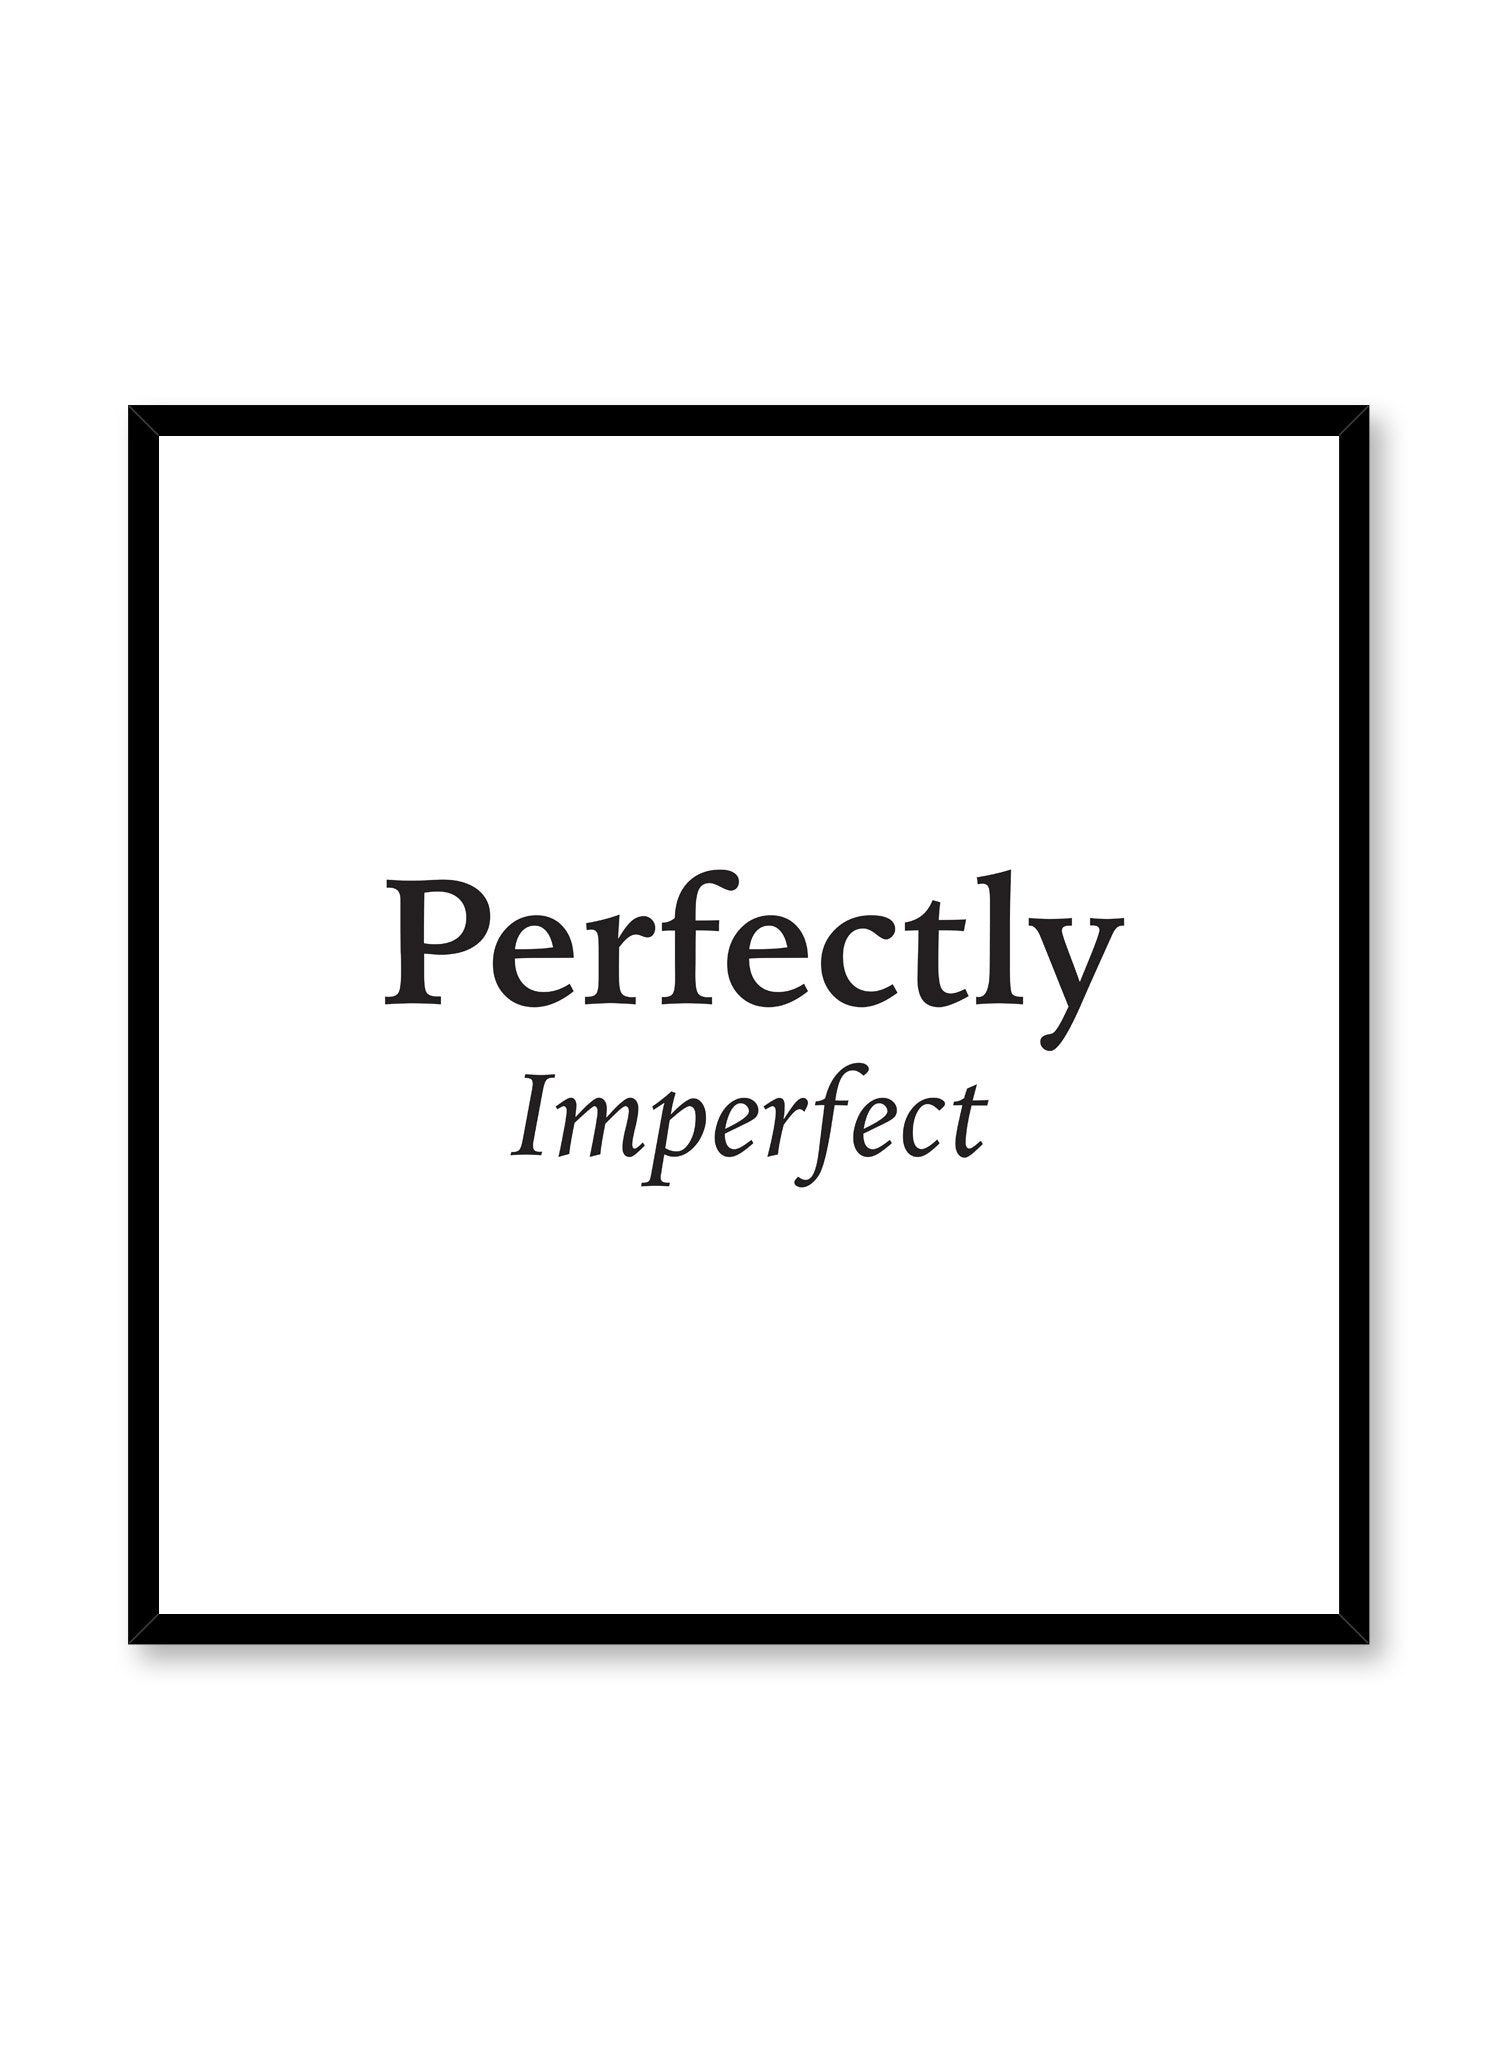 Scandinavian poster with black and white graphic typography design of Perfectly Imperfect by Opposite Wall in square format